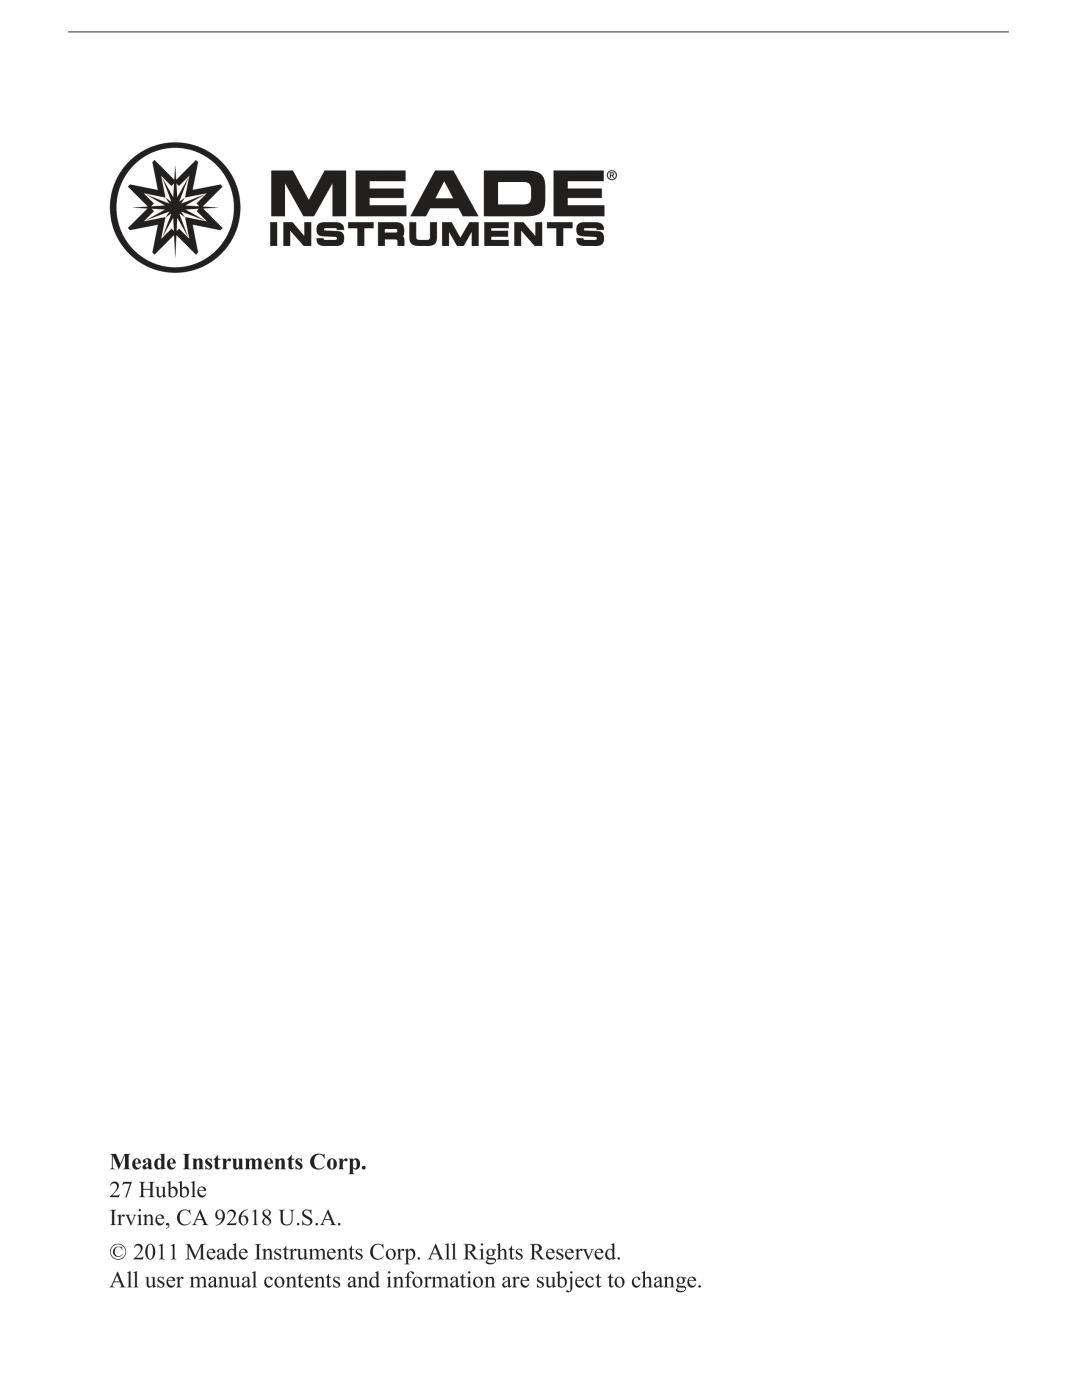 Meade TE346W user manual Hubble Irvine, CA 92618 U.S.A, Meade Instruments Corp. All Rights Reserved 